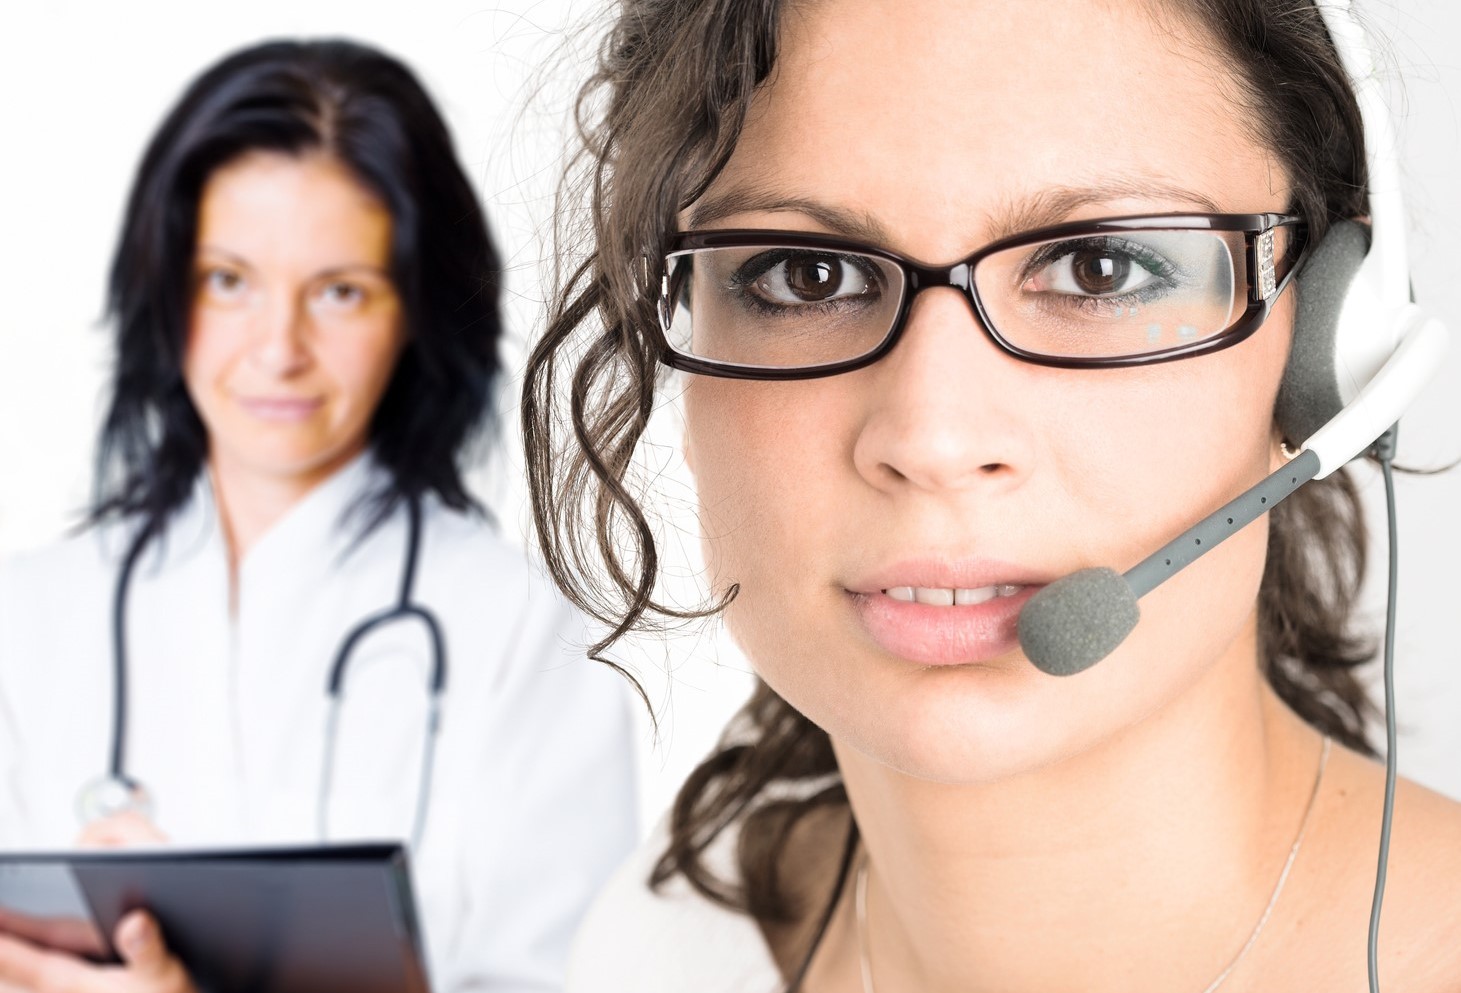 Triage Answering Service Operator wearing glasses and a headset stands in front of a triage nurse holding a clipboard and wearing a stethoscope.